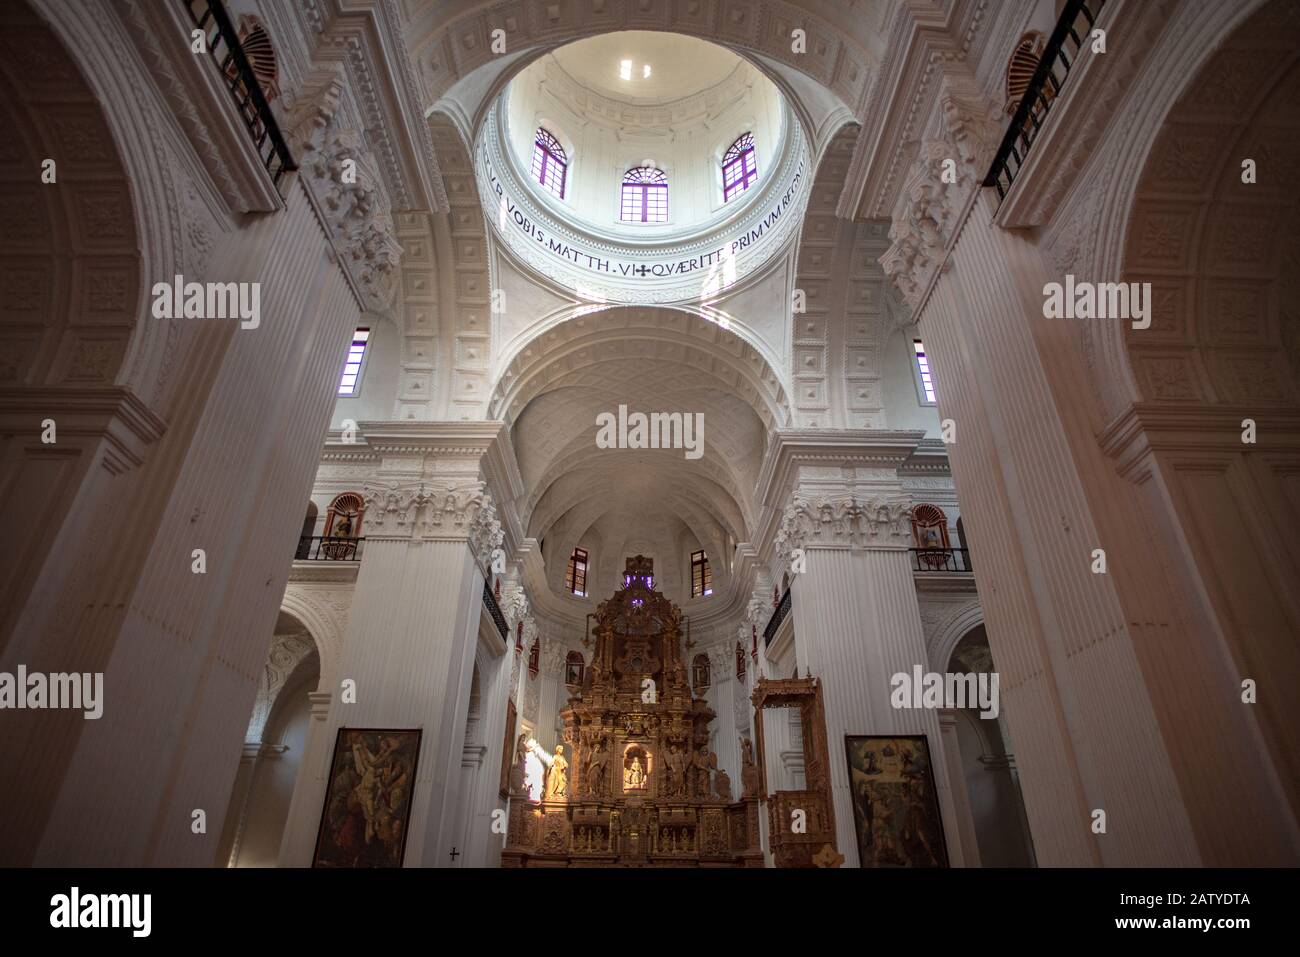 Old Goa, India - February 26, 2018: Main nave of the Church of St. Cajetan, with no people Stock Photo